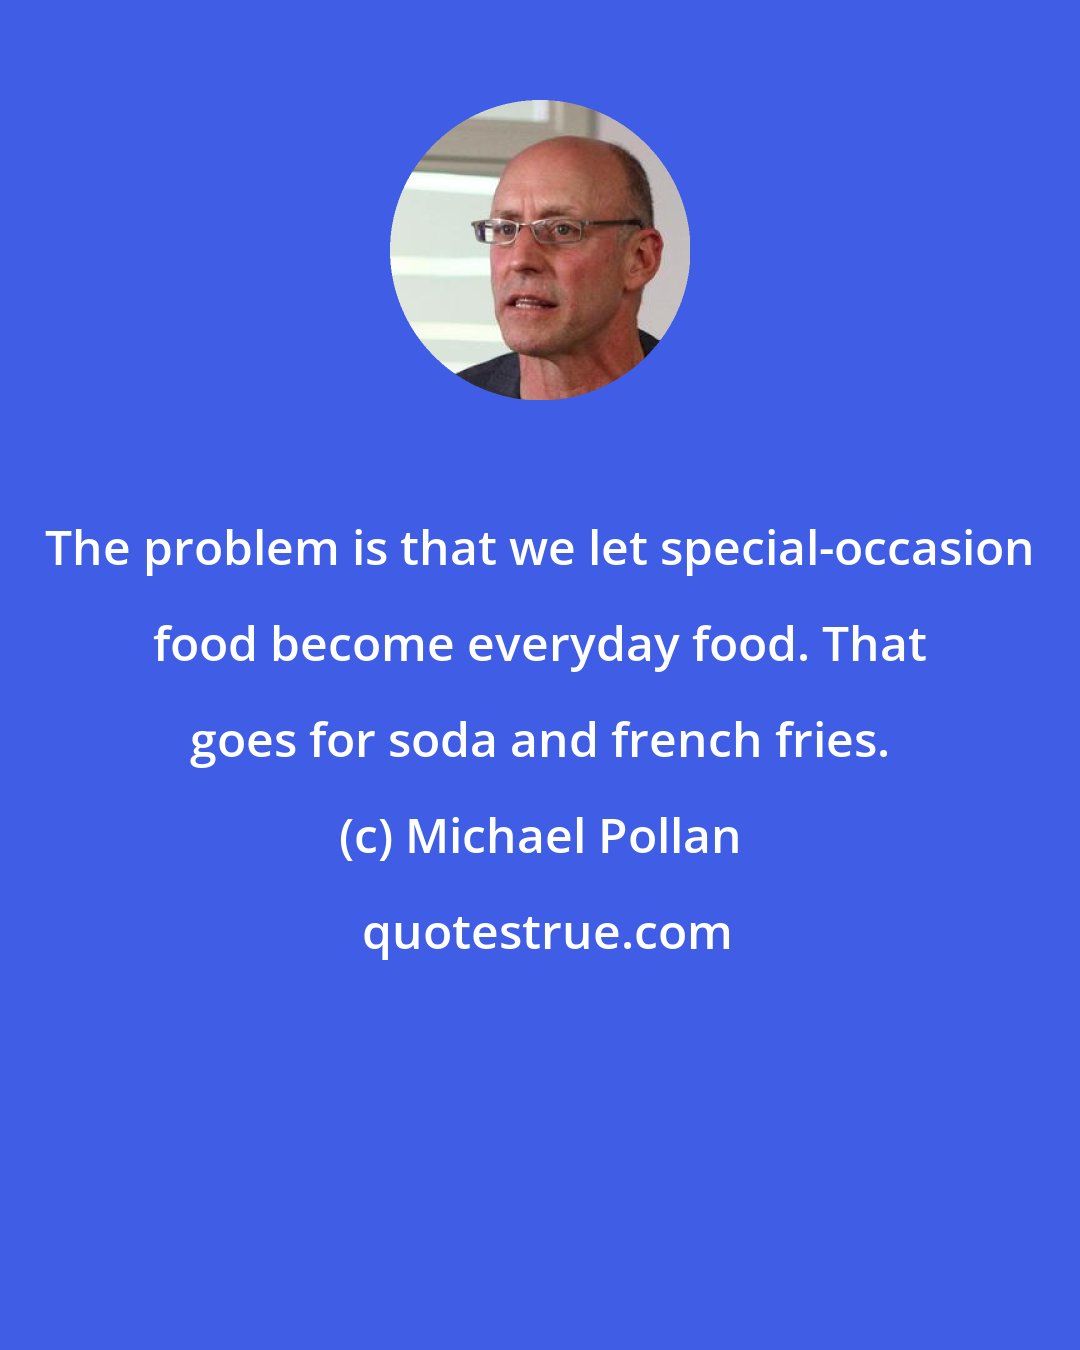 Michael Pollan: The problem is that we let special-occasion food become everyday food. That goes for soda and french fries.